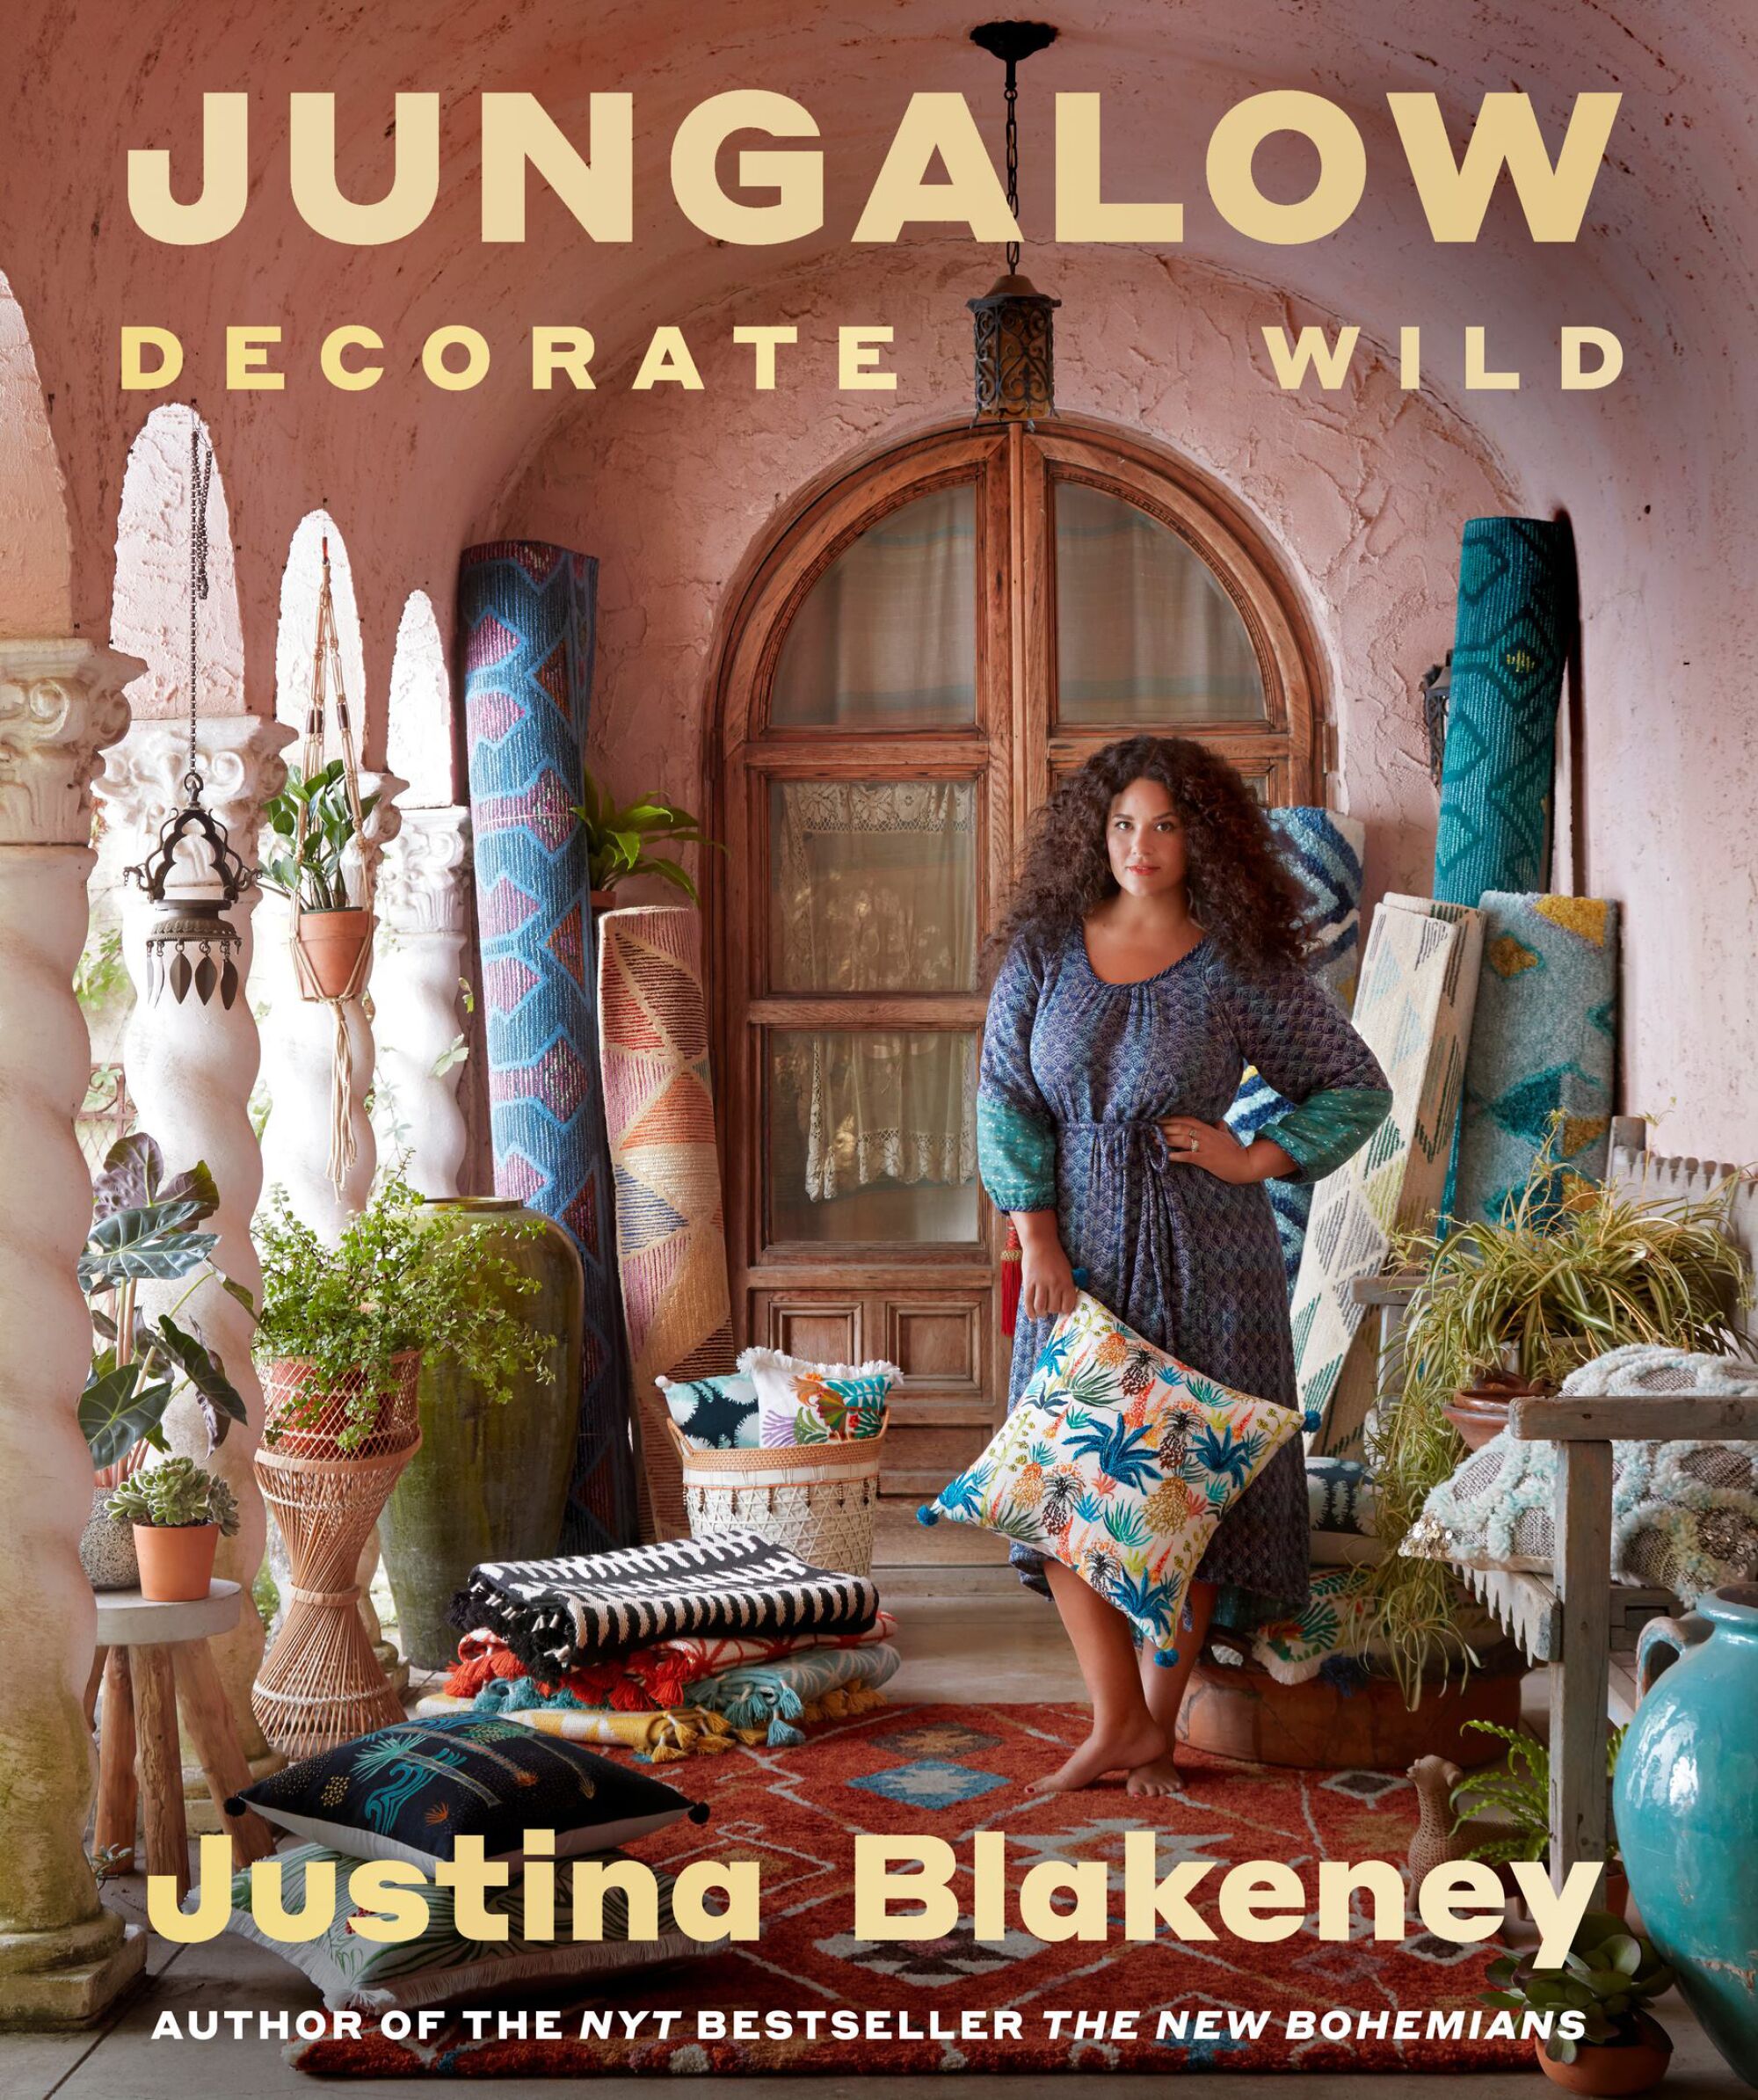 The cover of "Jungalow: Decorate Wild" by Justina Blakeney.